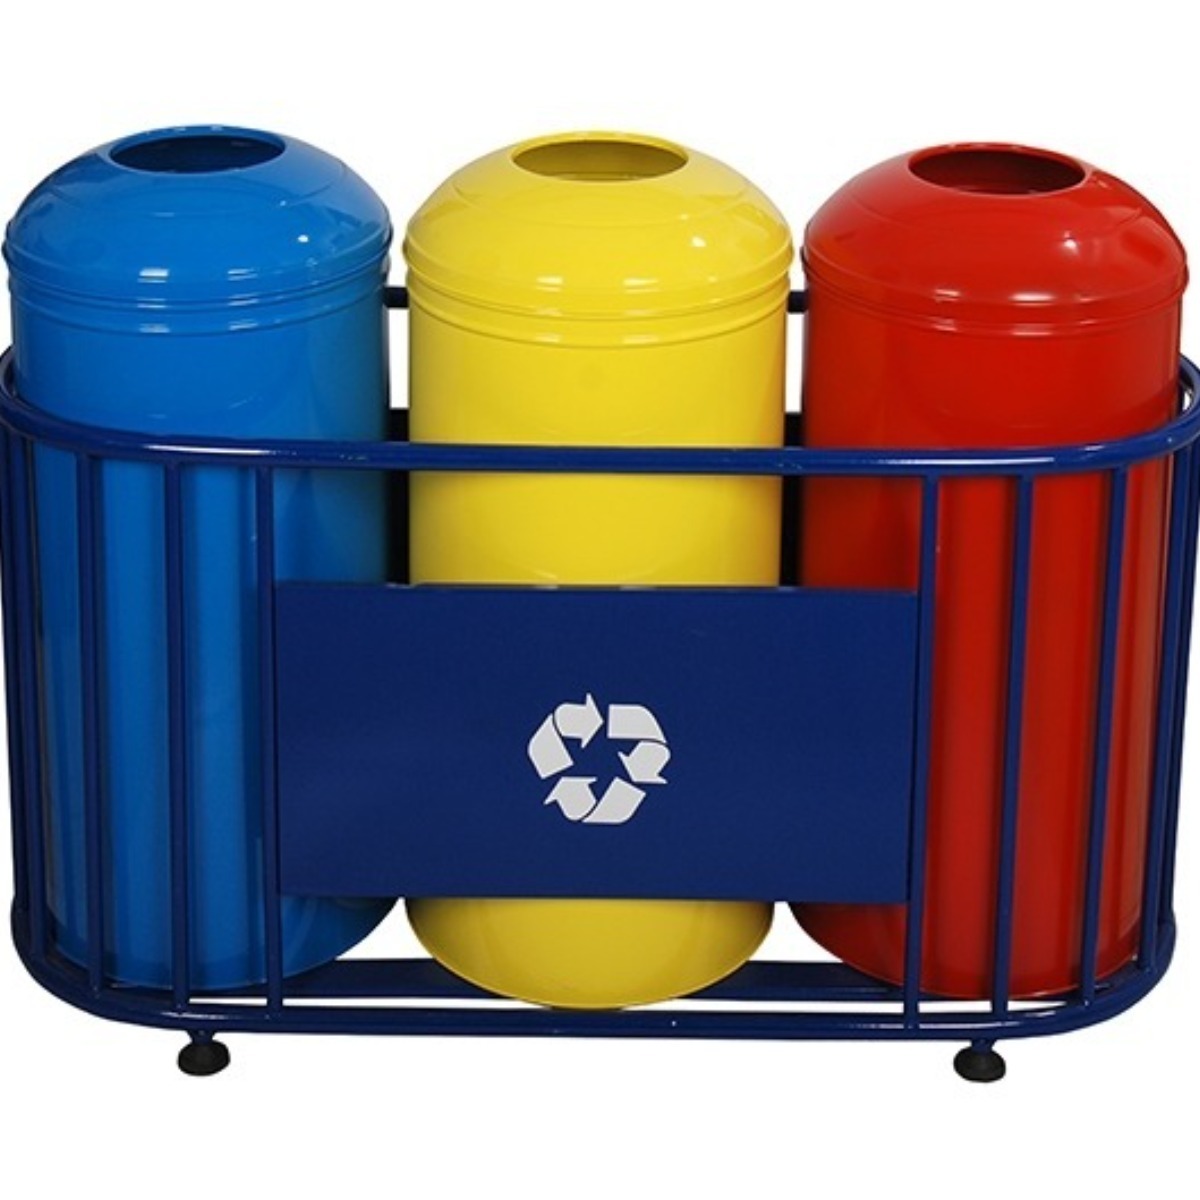 AB-786 3'Part Recycle Bin